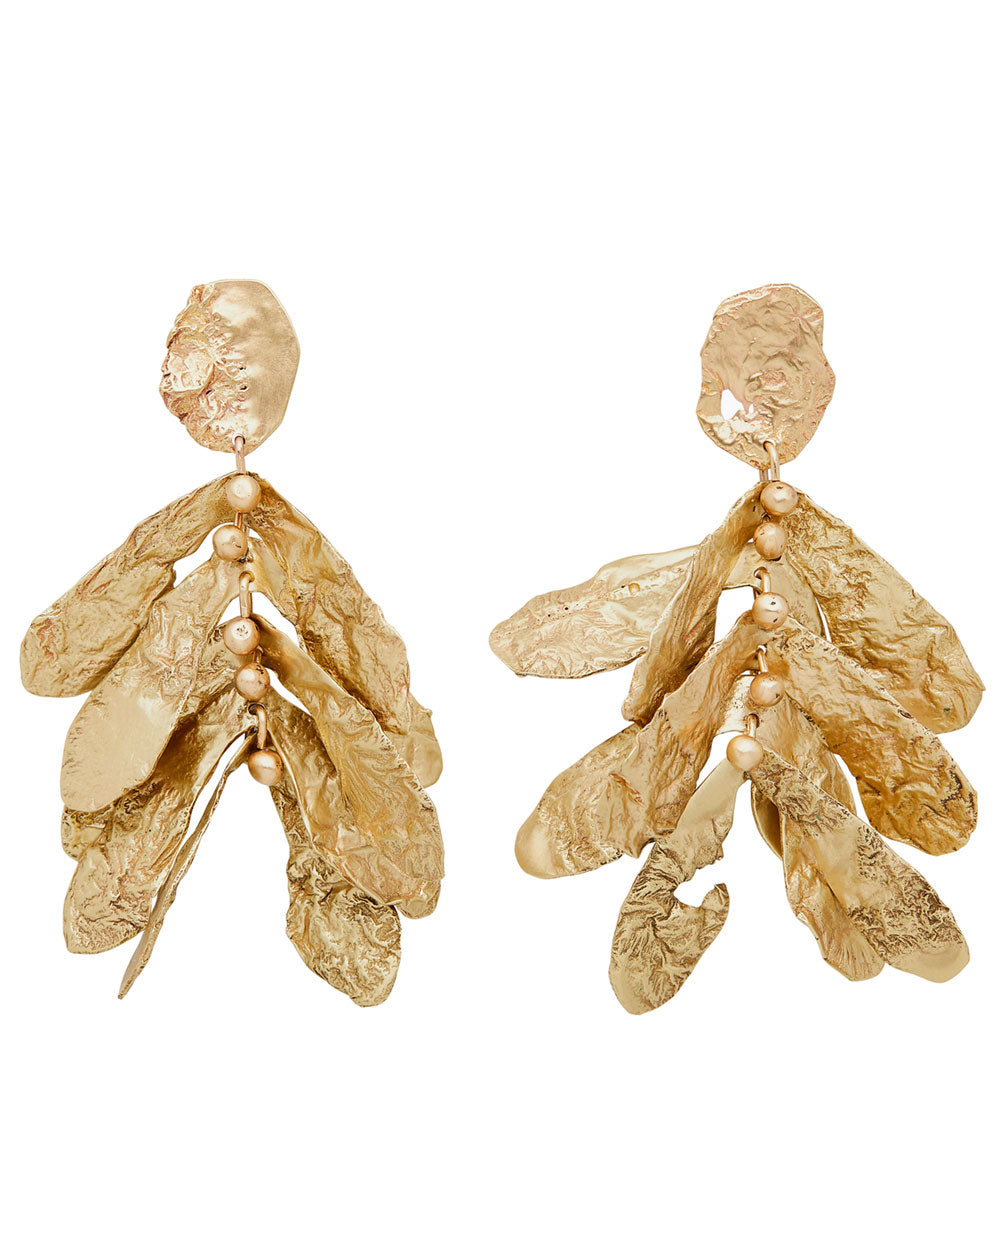 Bronze Sycamore Earrings